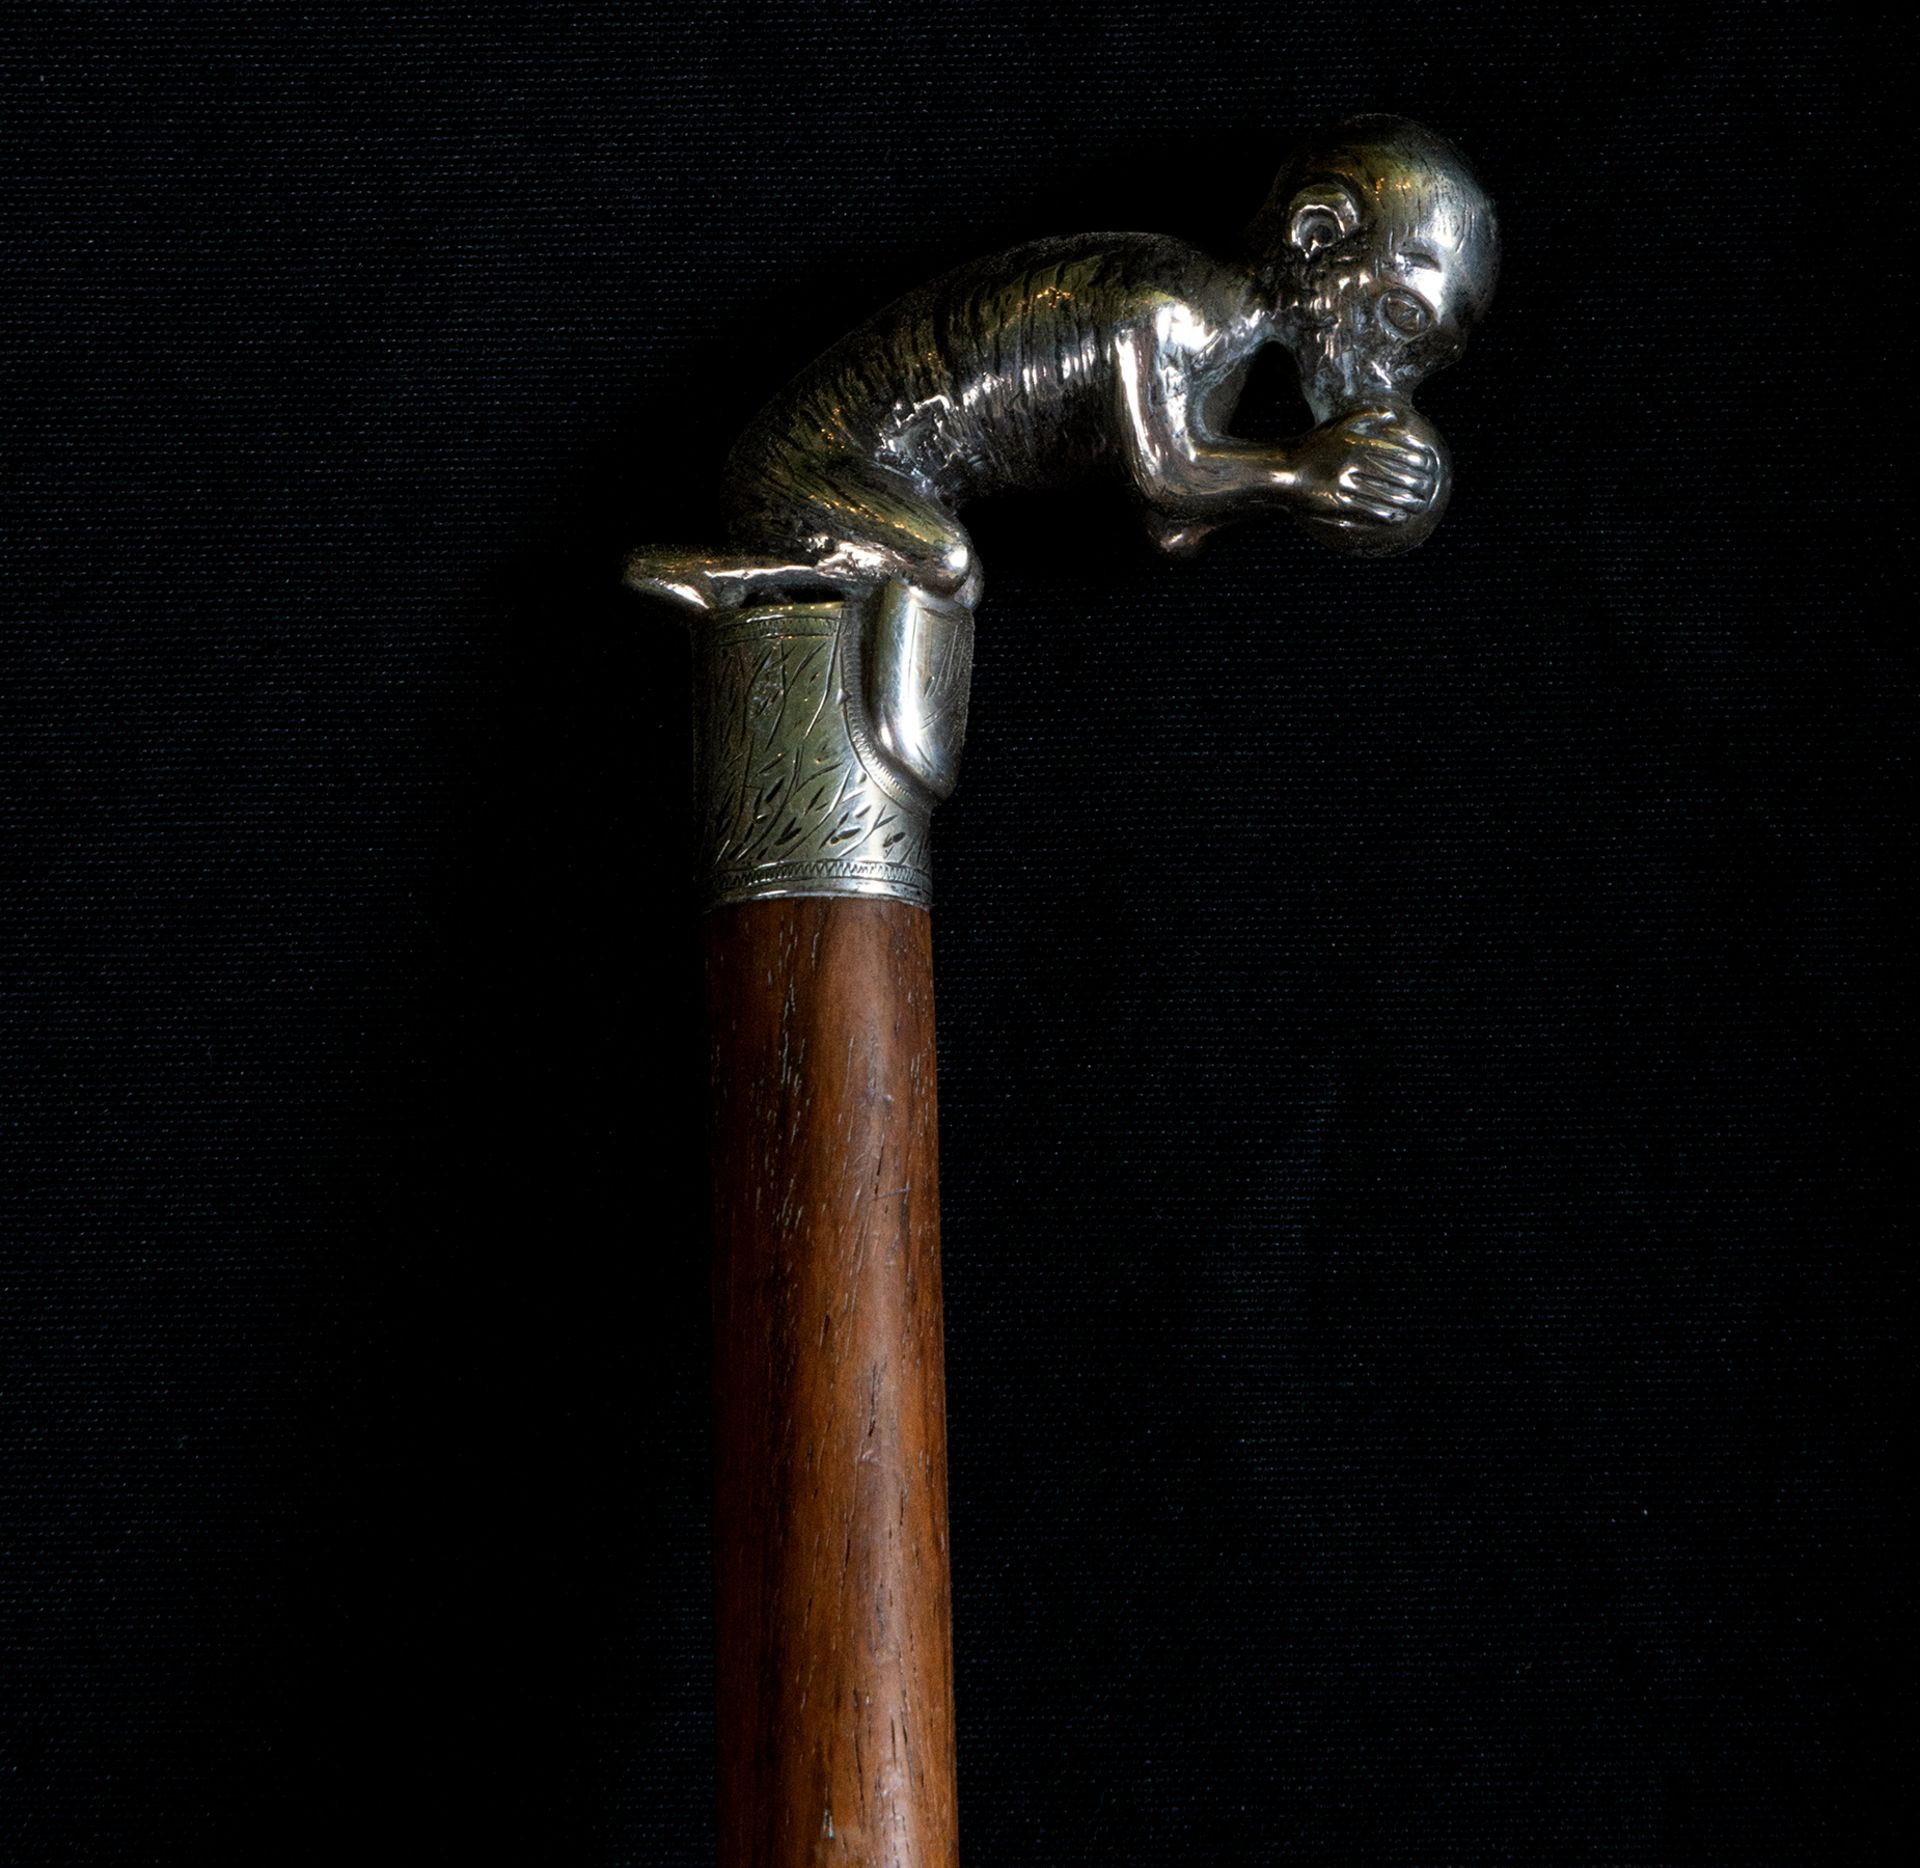 Colonial Jamaican walking stick with monkey handle and heraldic shield, 19th century